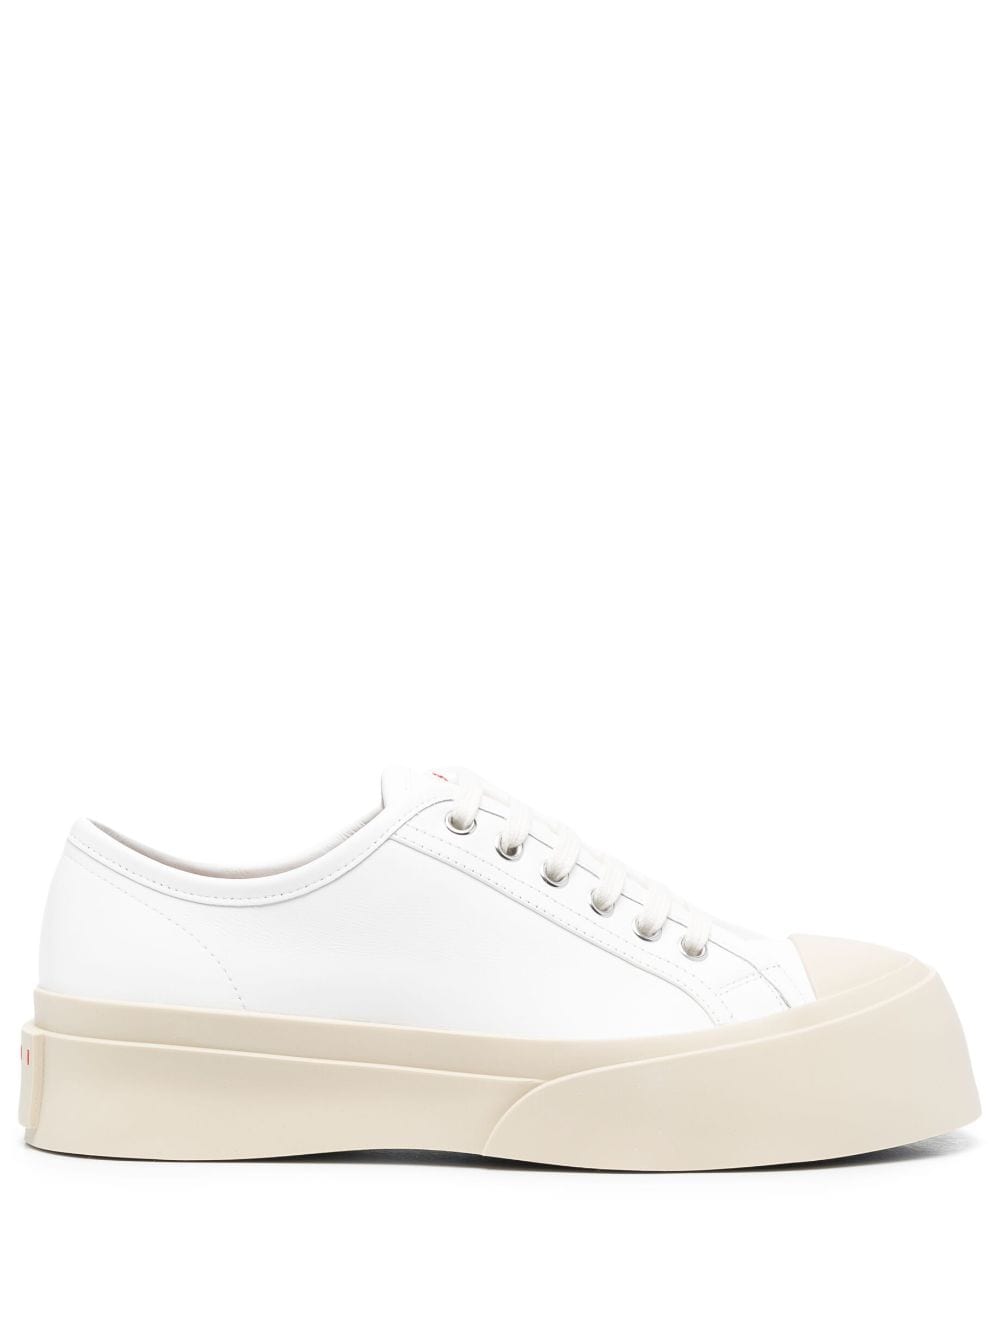 Marni Pablo low-top lace-up Sneakers - Farfetch